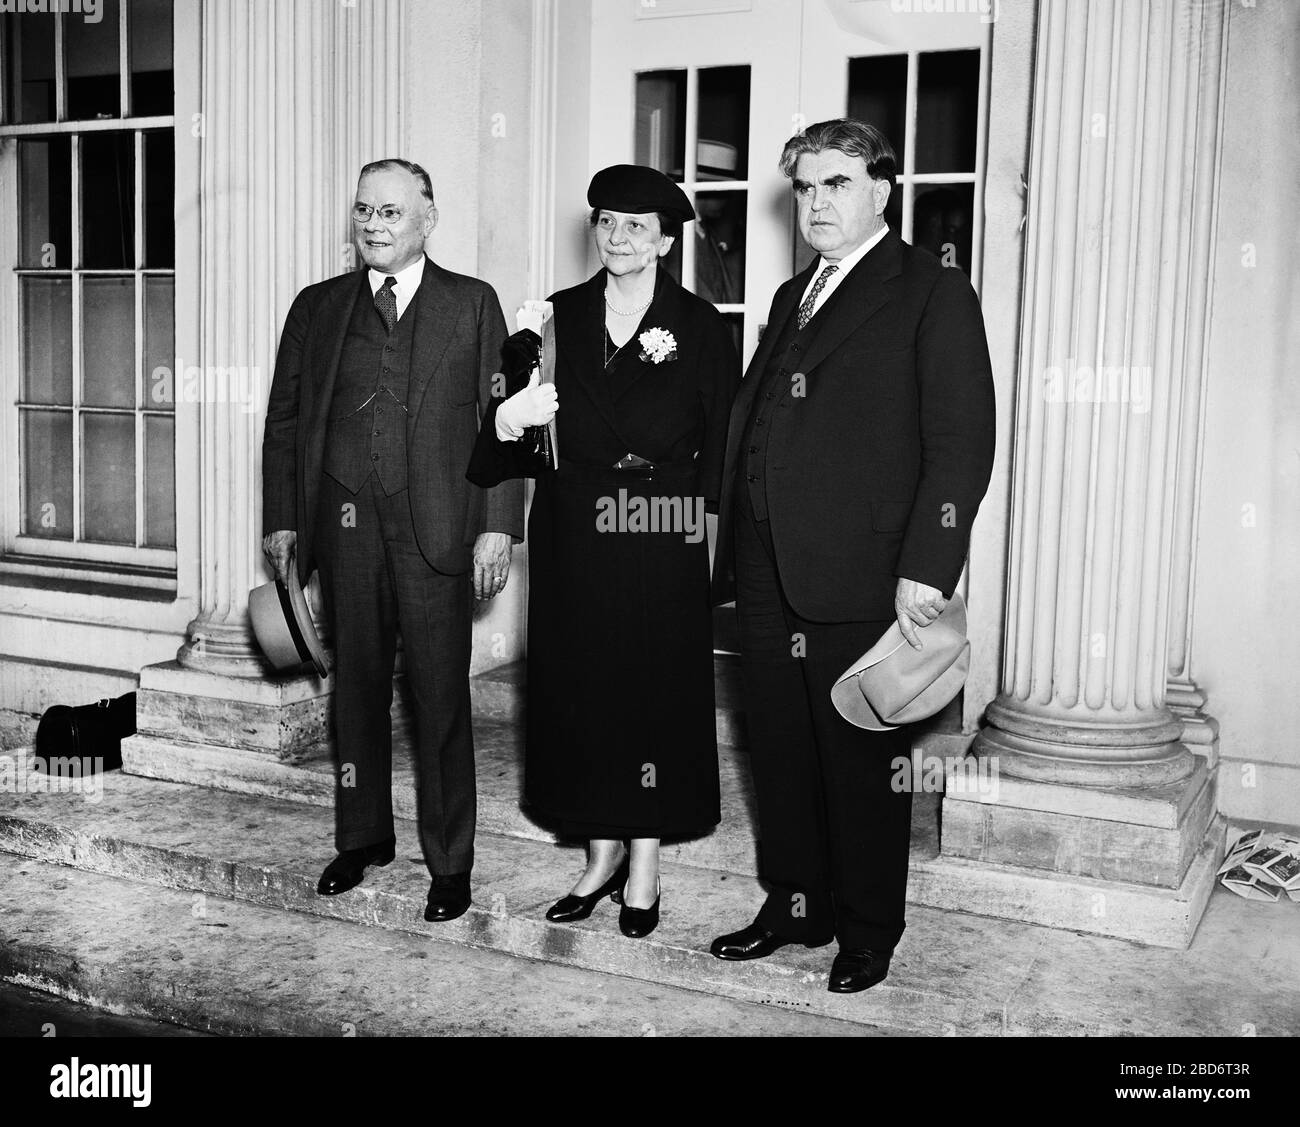 William Green, A.F. of L., U.S. Secretary of Labor Frances Perkins, John L. Lewis, Pres. United Mine Workers, leaving White House after meeting with U.S. President Franklin Roosevelt, Washington, D.C., USA, Harris & Ewing, 1935 Stock Photo